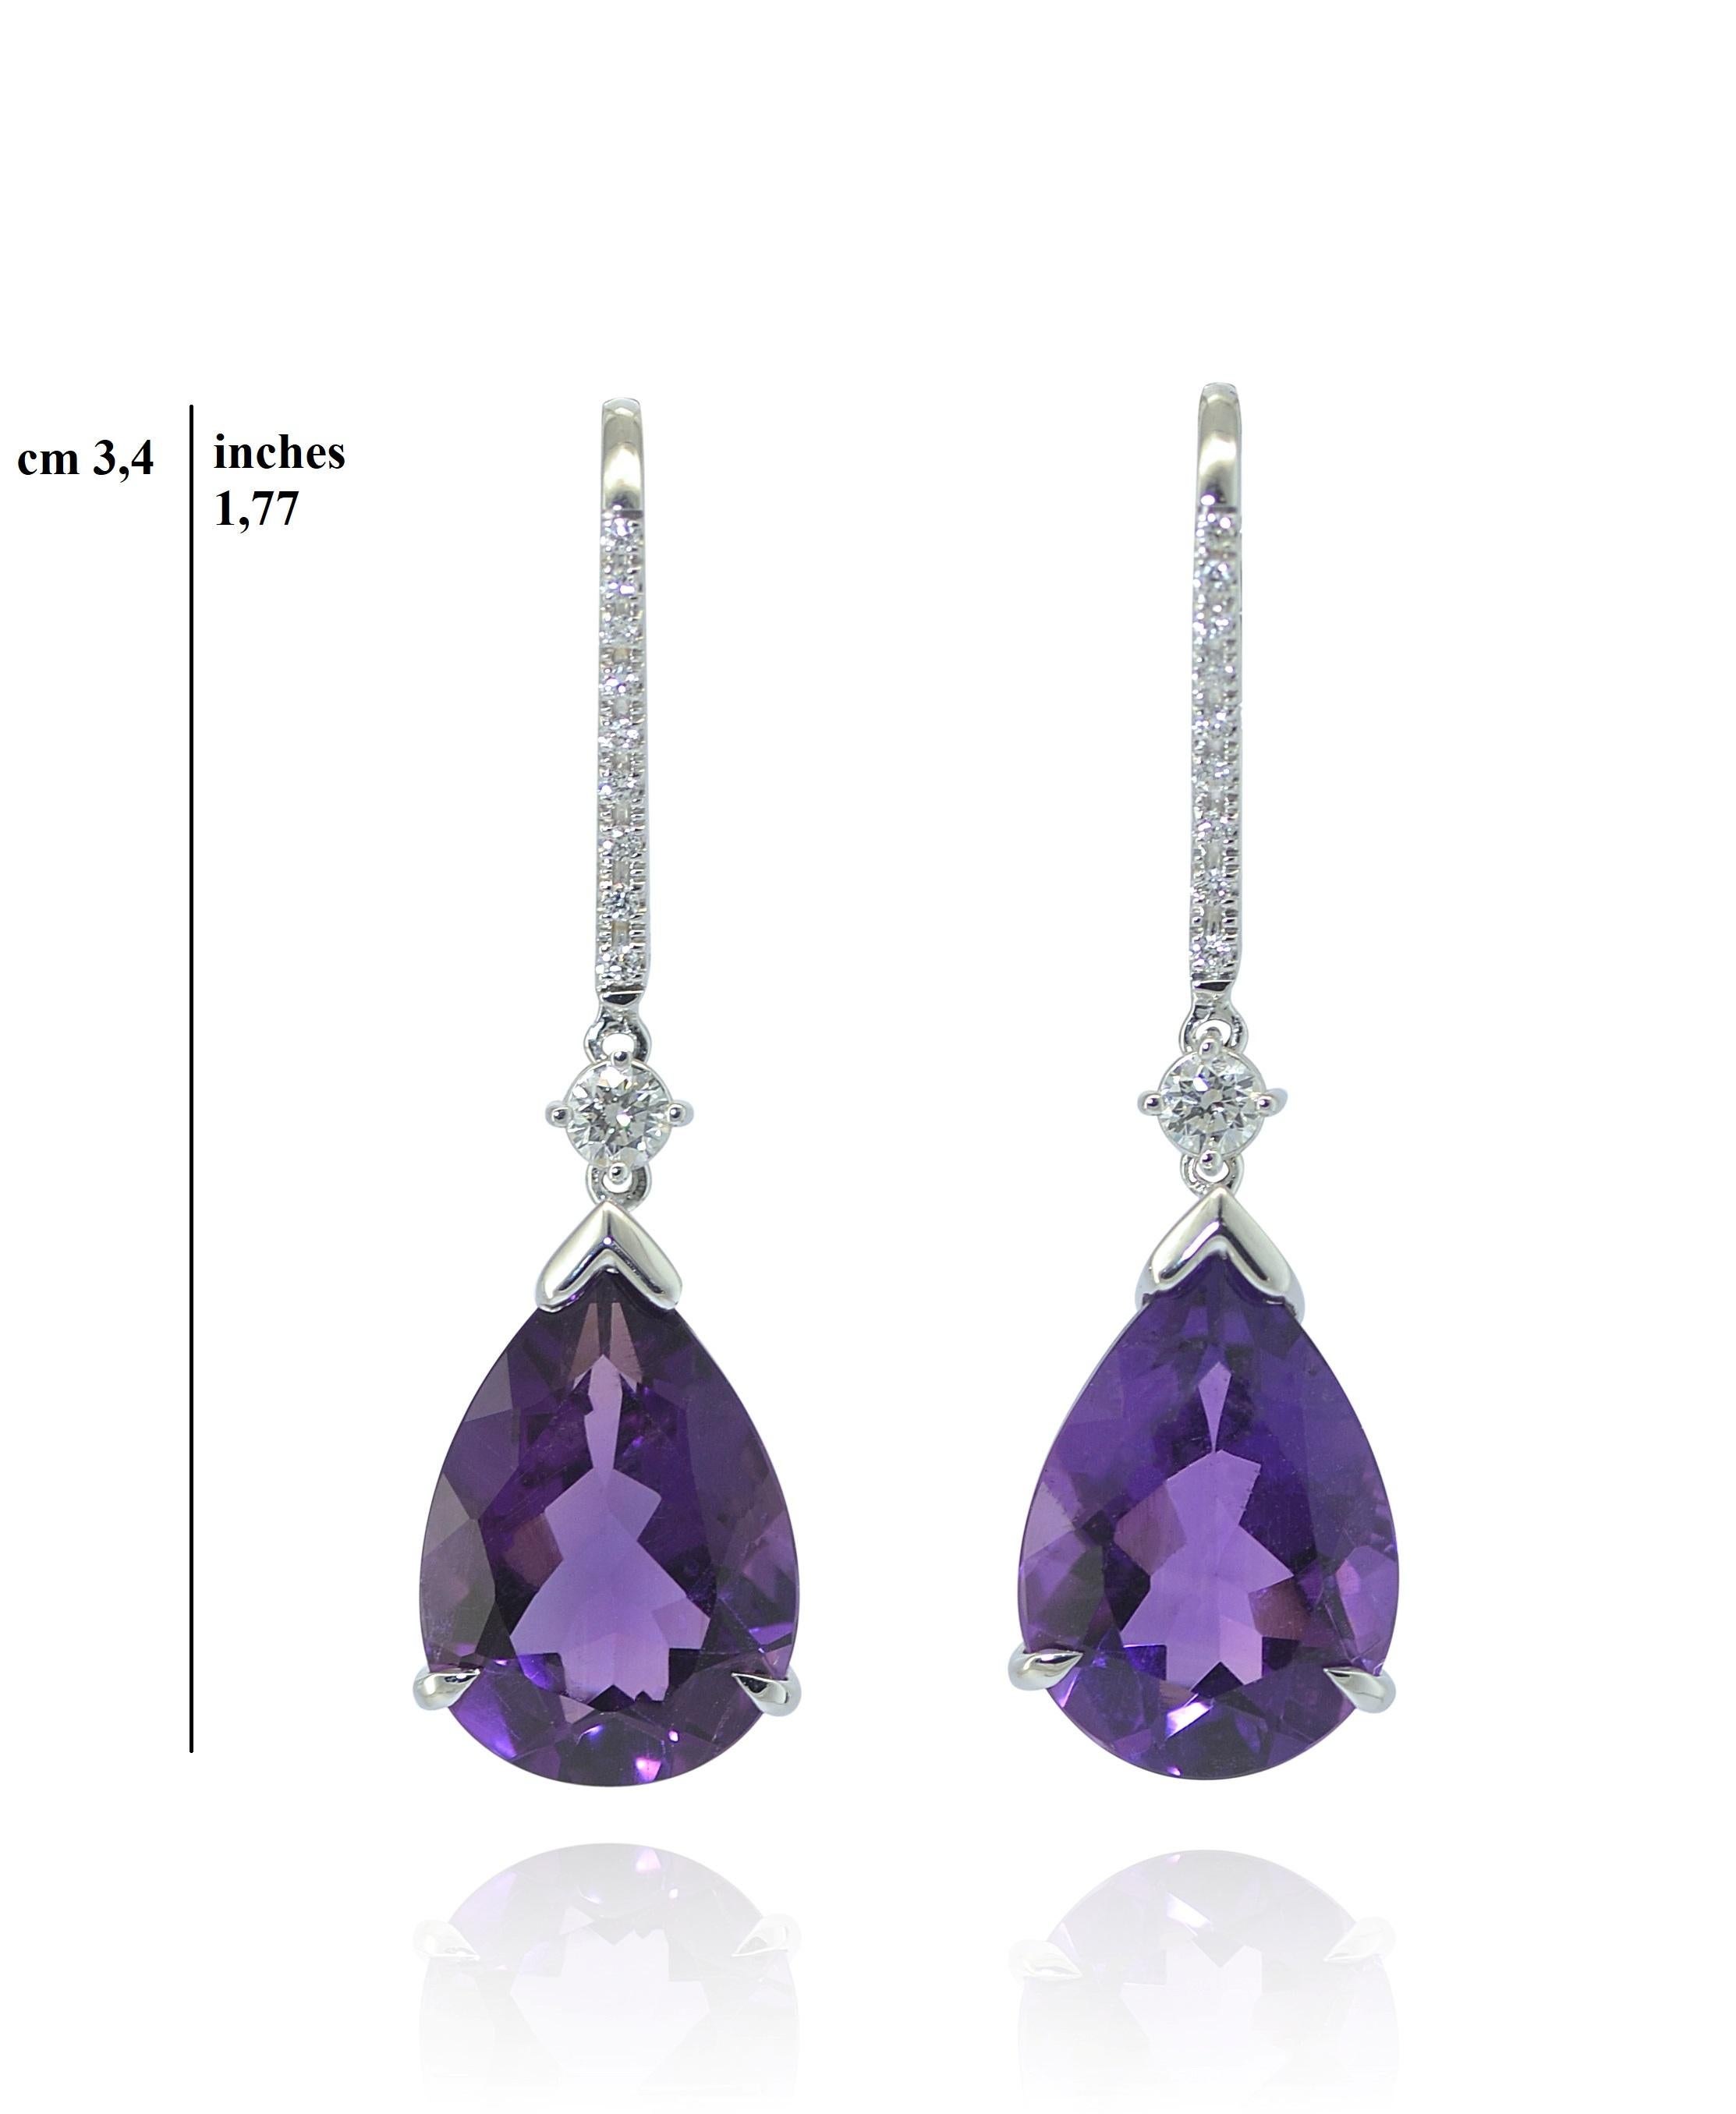 Every day chic pair of amethyst and diamonds earrings. Set on 18 Kt white gold, they are exquisite style, classic yet contemporary design. 

Handmade in Margherita Burgener workshop, Valenza, Italy. Highest craftsmanship and quality of stones. 

18